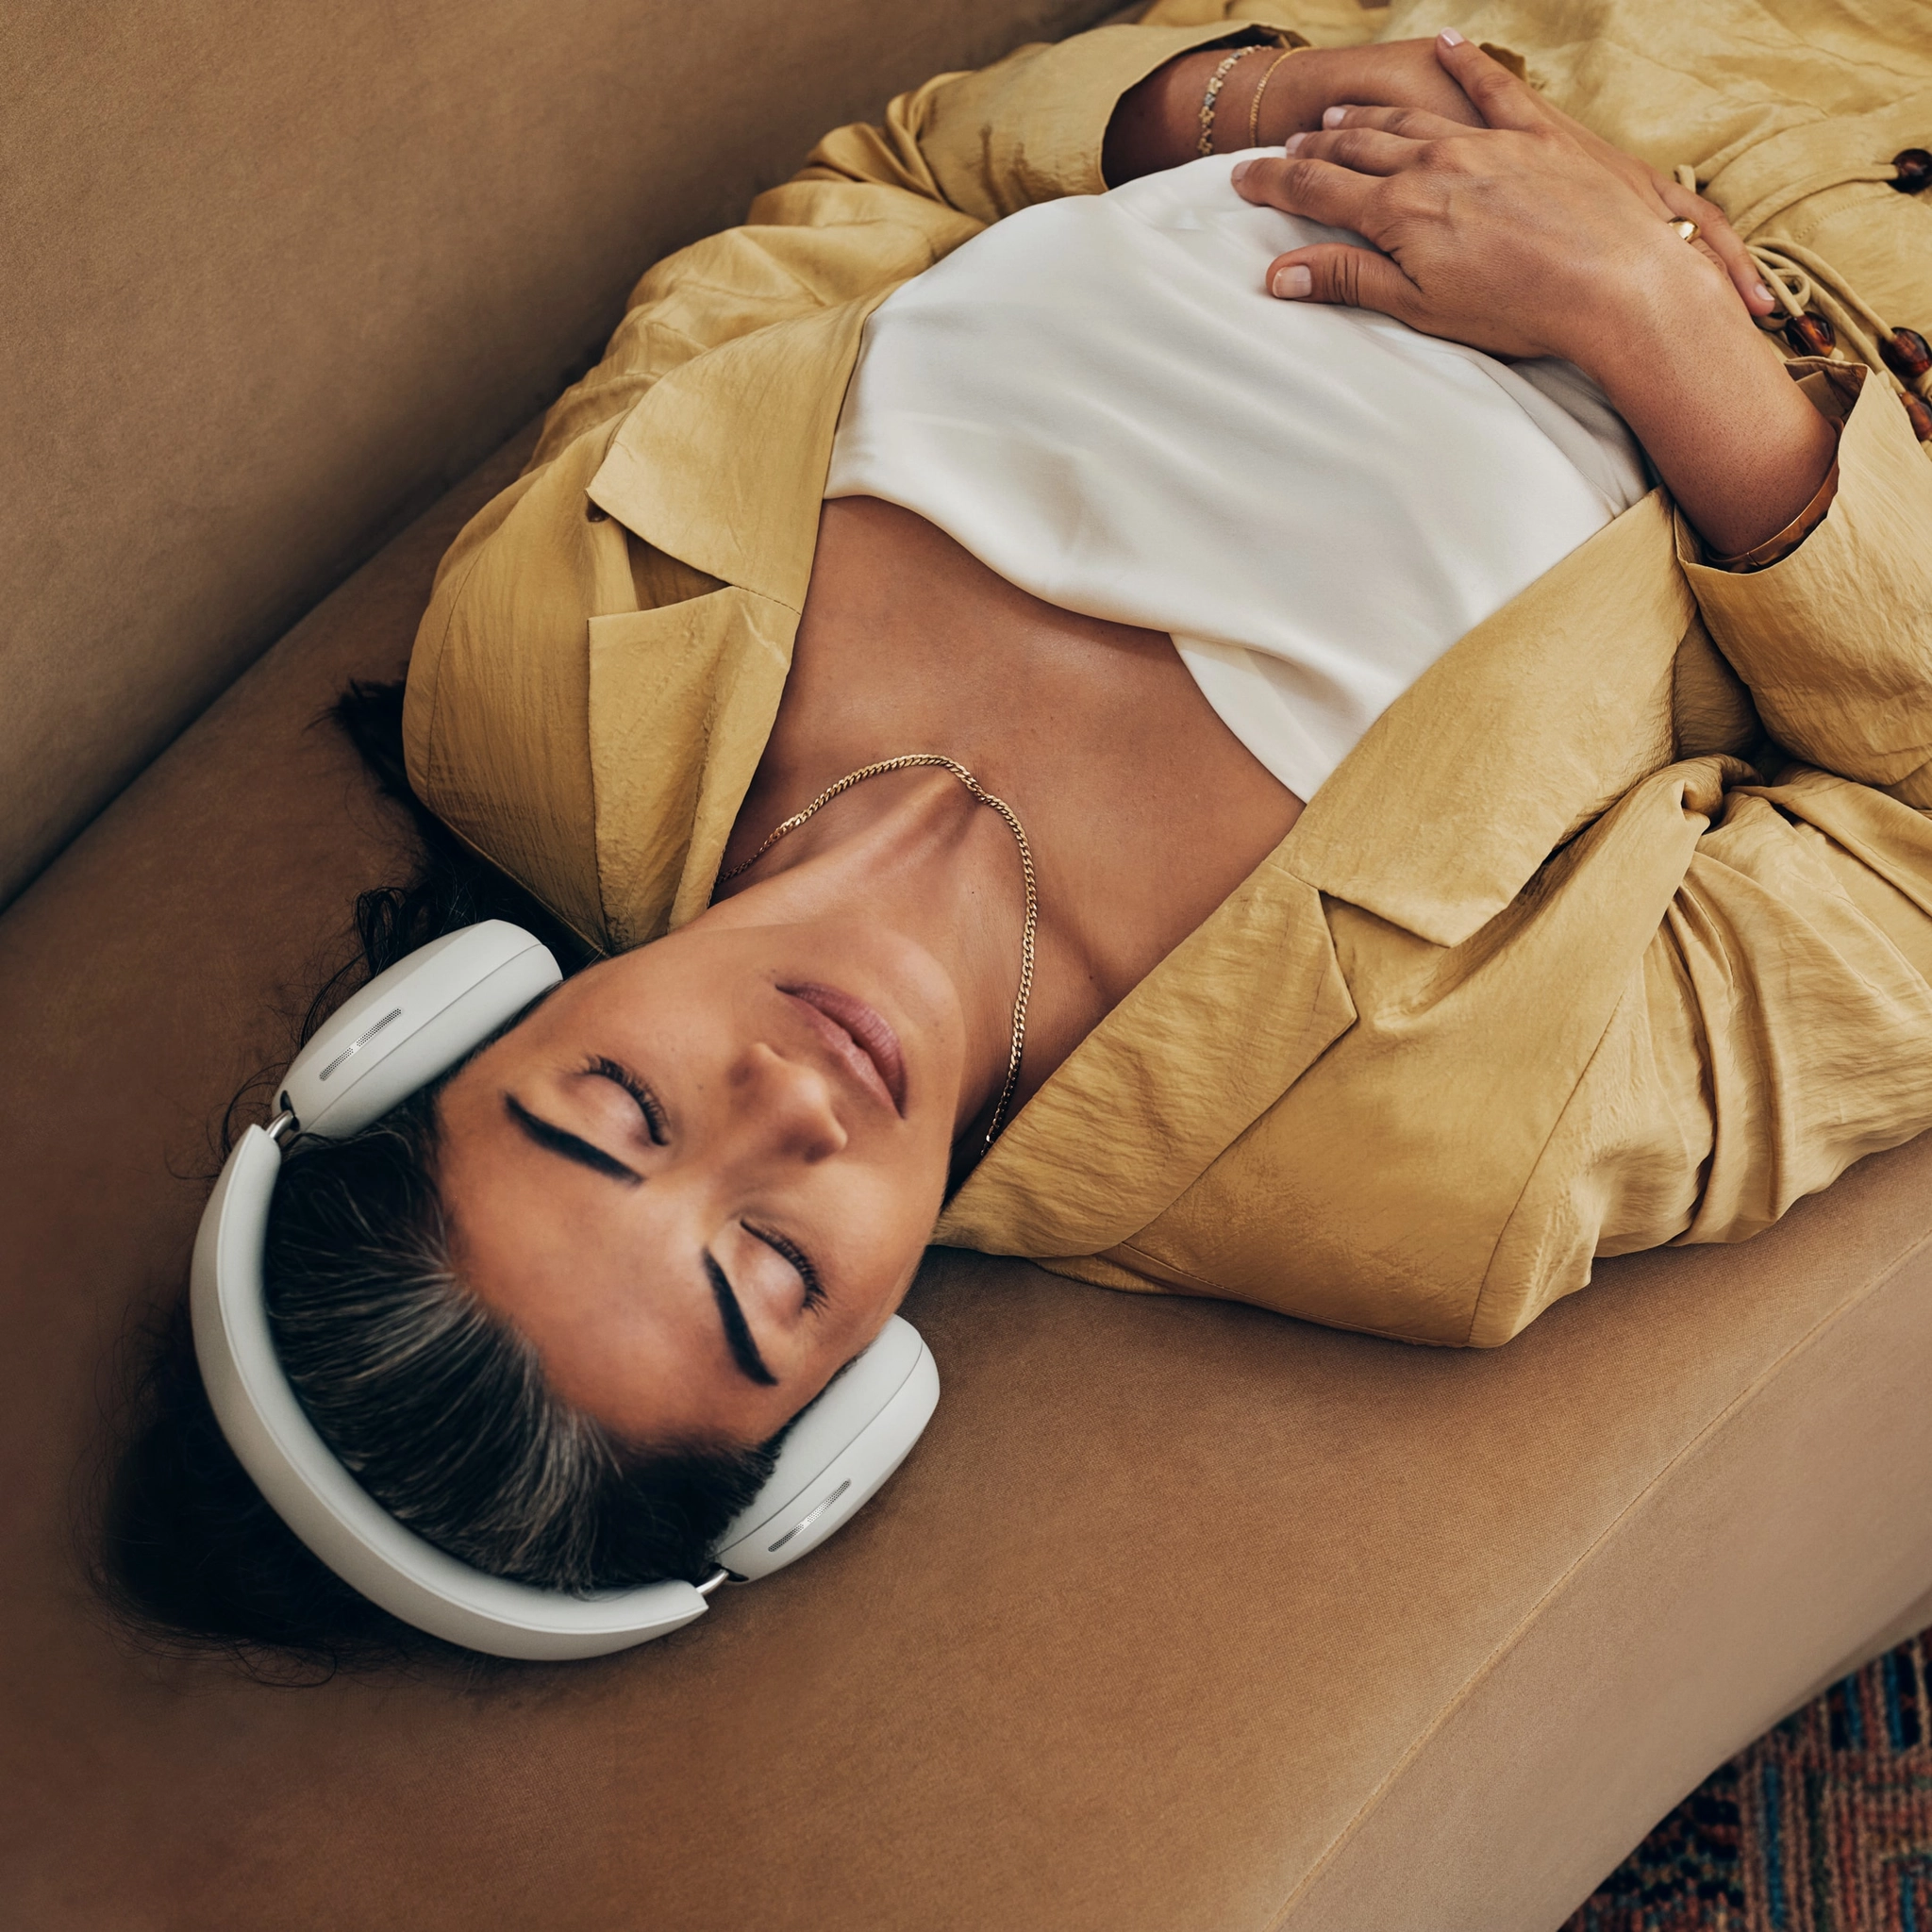 Sonos Ace Headphones: Redefining Immersive Audio On The Go - A Person In A Yellow Jacket And White Shirt Is Lying On A Couch With Eyes Closed, Wearing The New Sonos Ace Headphones And Resting Hands On Their Stomach.